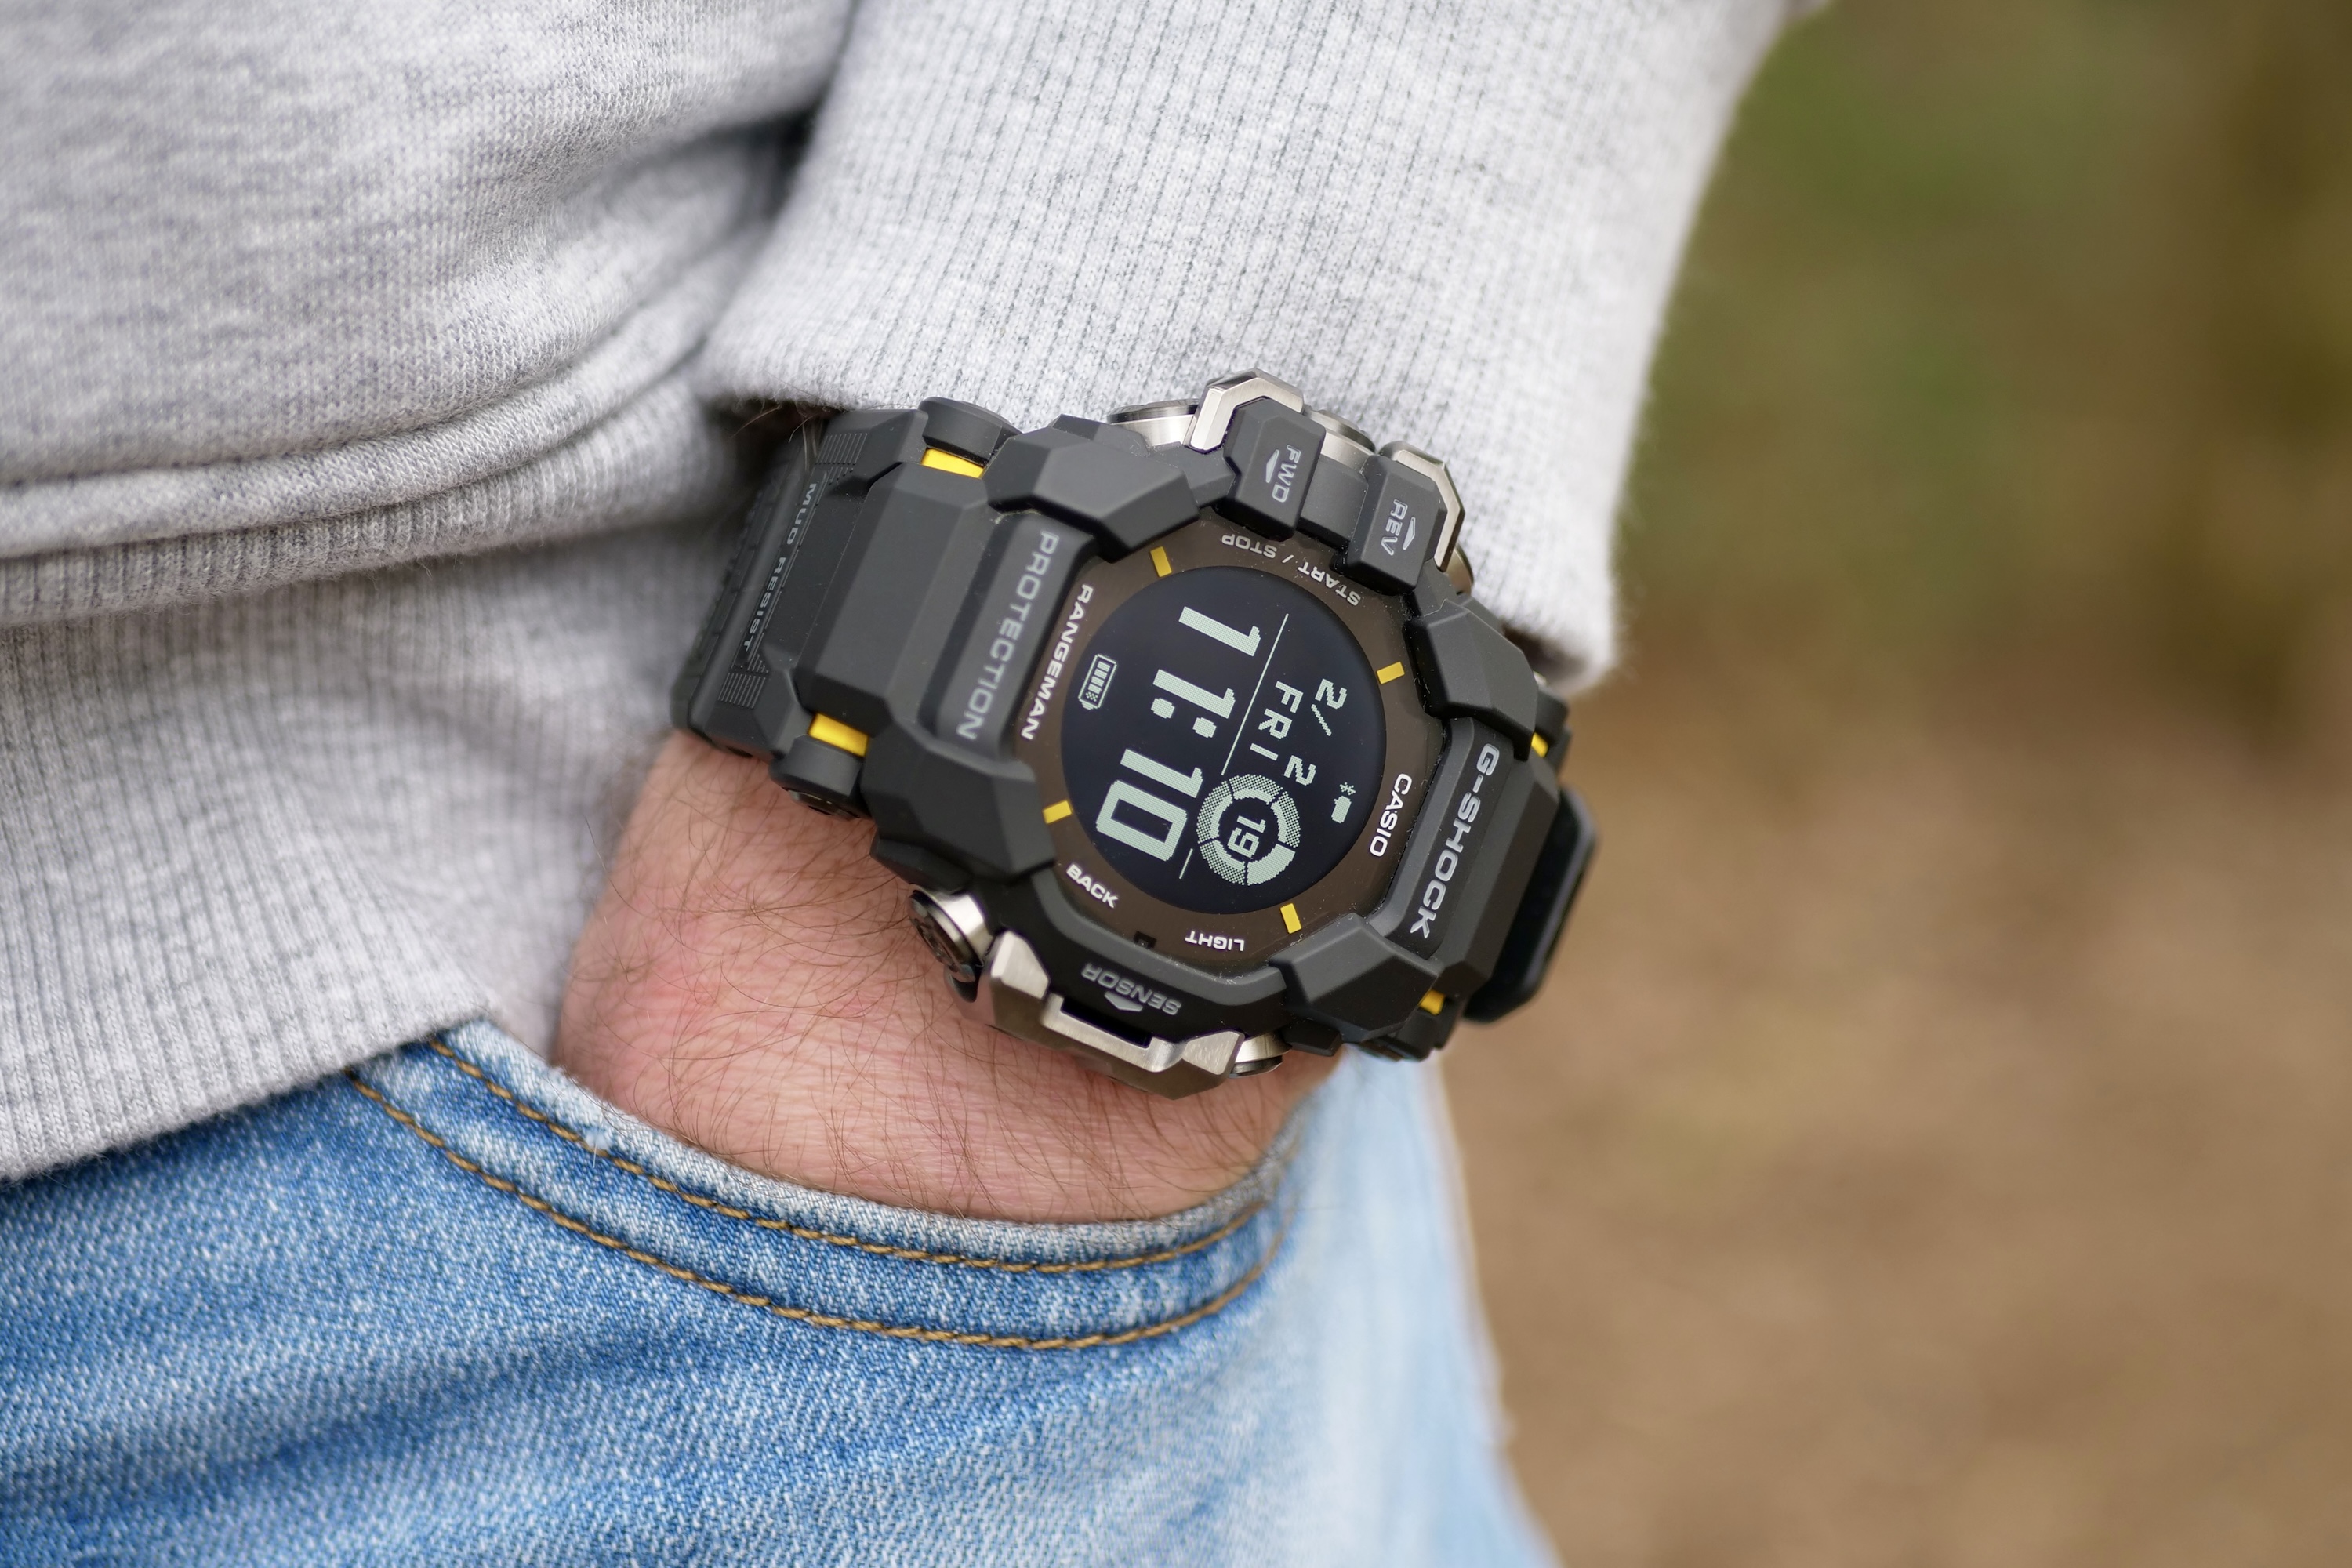 I tested G-Shock's new Apple Watch Ultra killer, and it's great